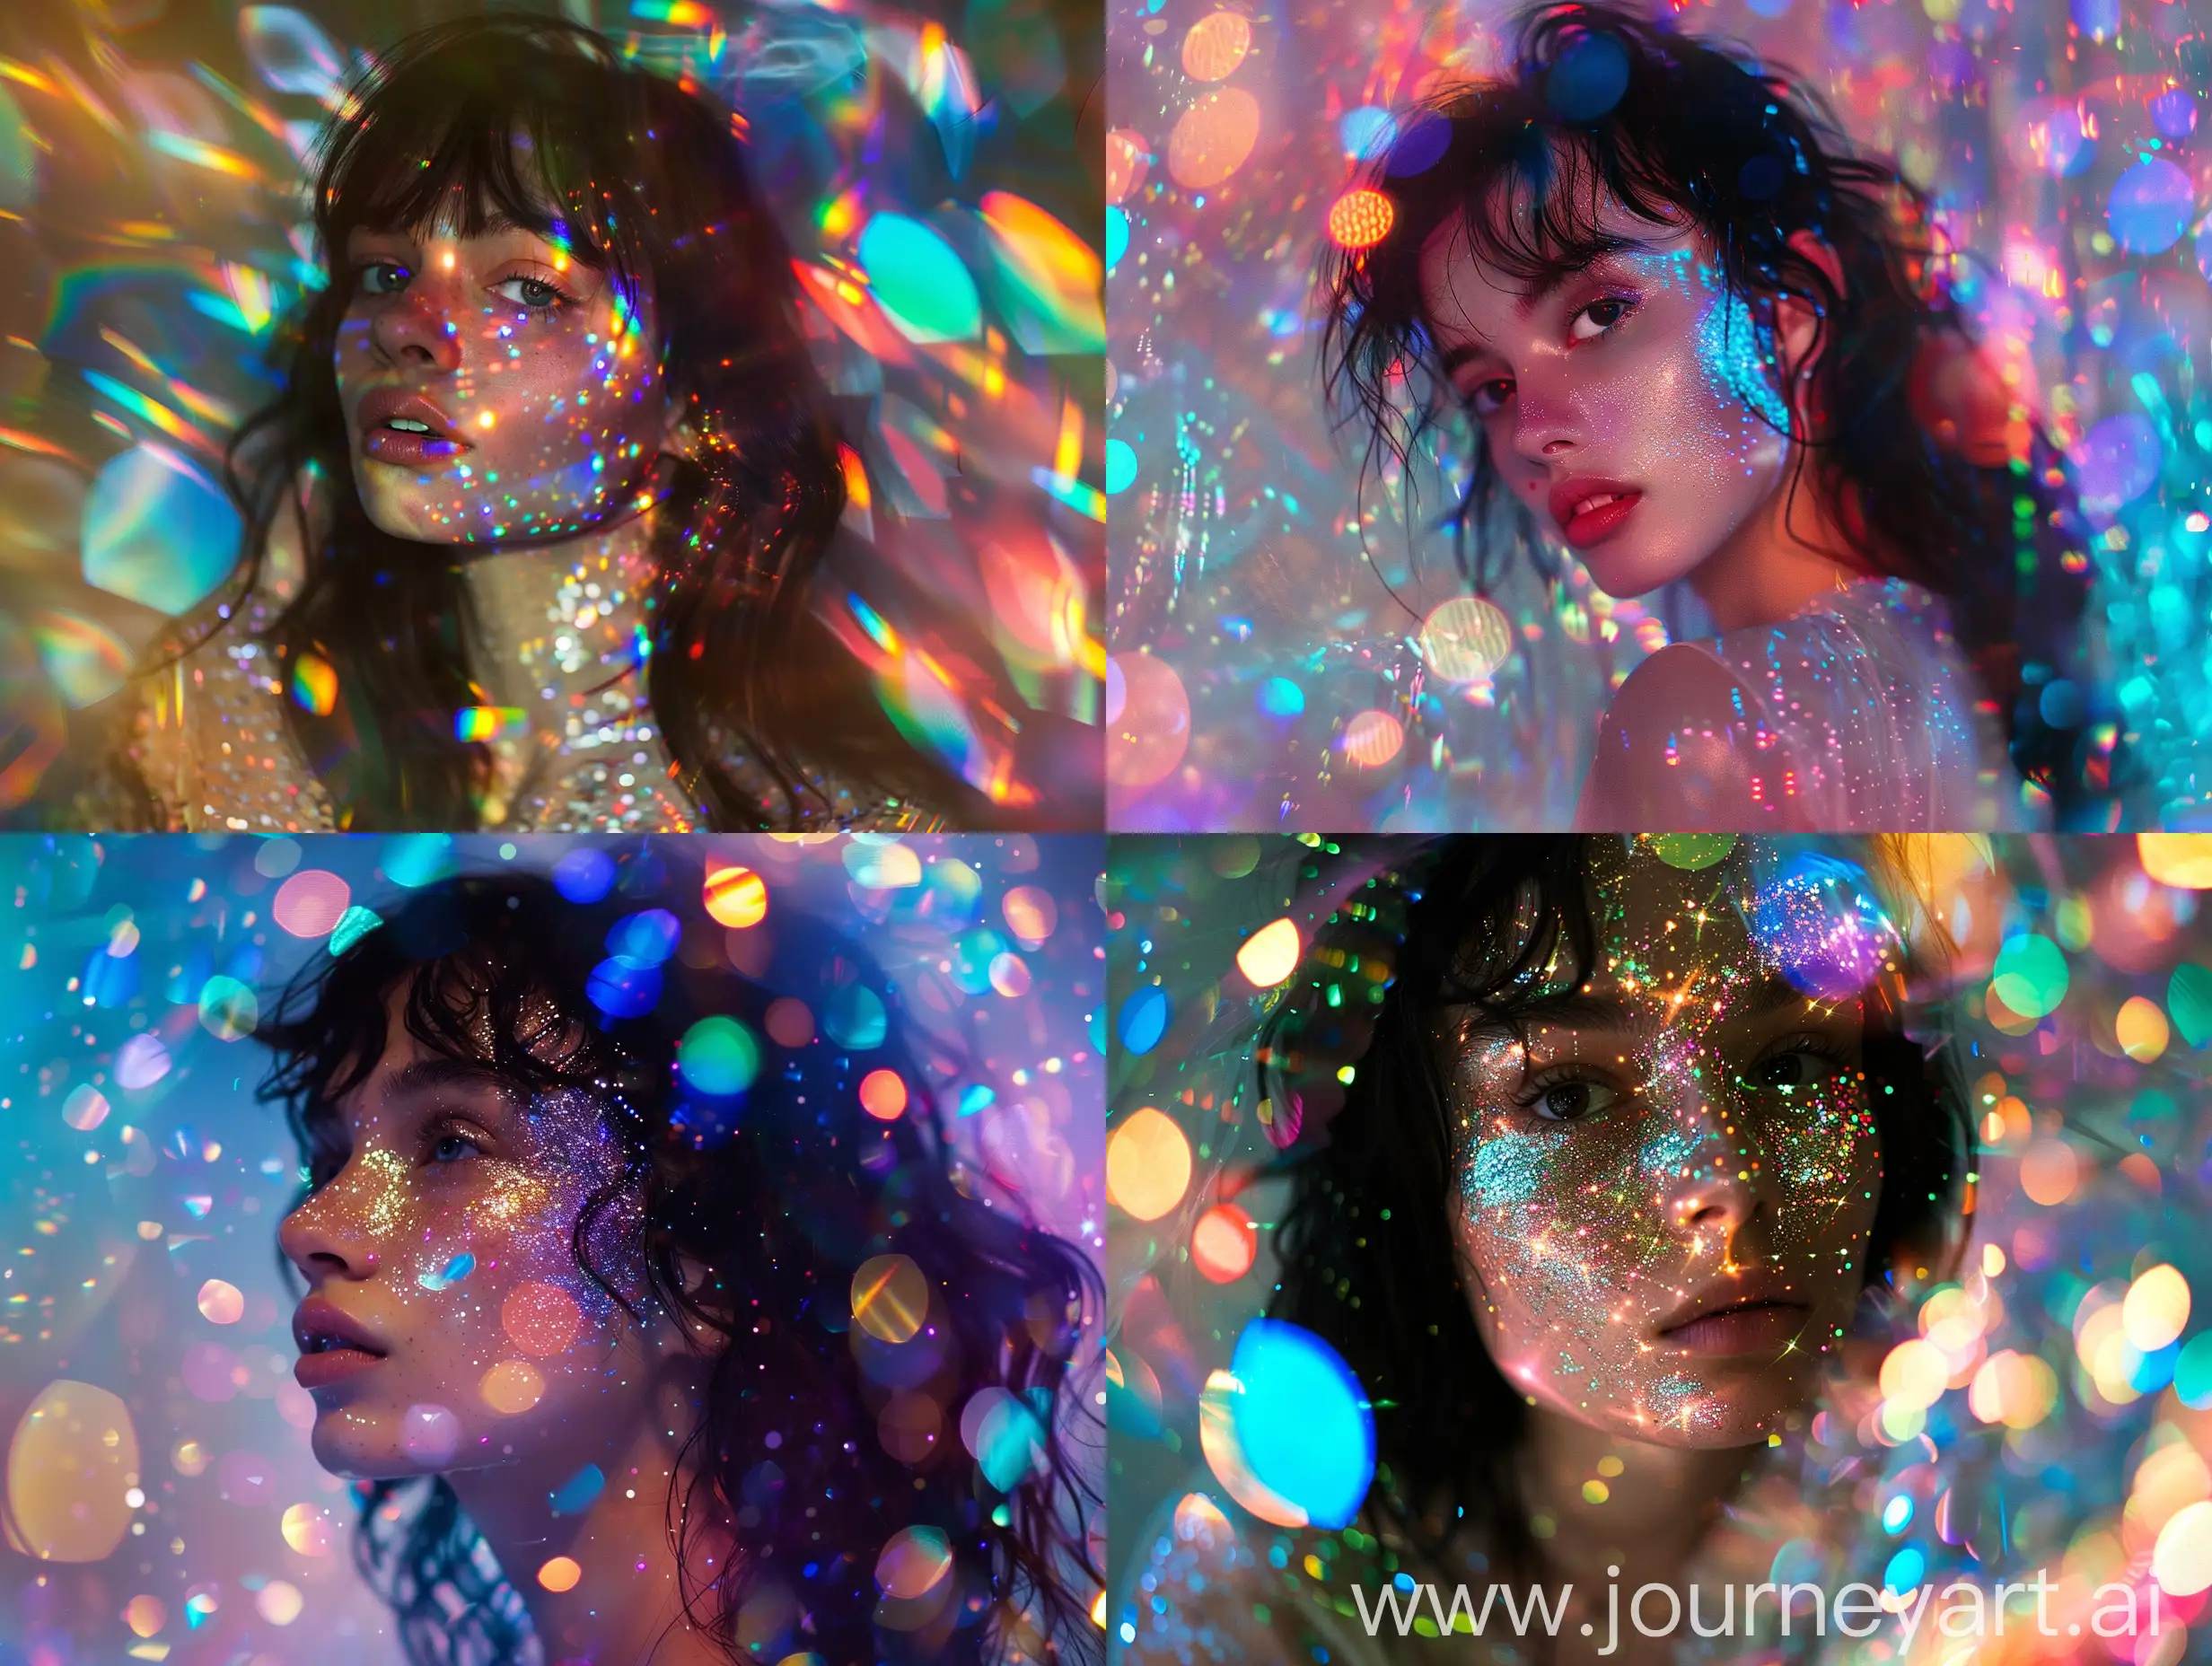 a young woman with dark hair and a face illuminated by sparkling lights, stand and strike a pose, set against a holographic, shimmering, glittery rainbowcore background, captured with double exposure photography to create a psychedelic, cinematic beauty